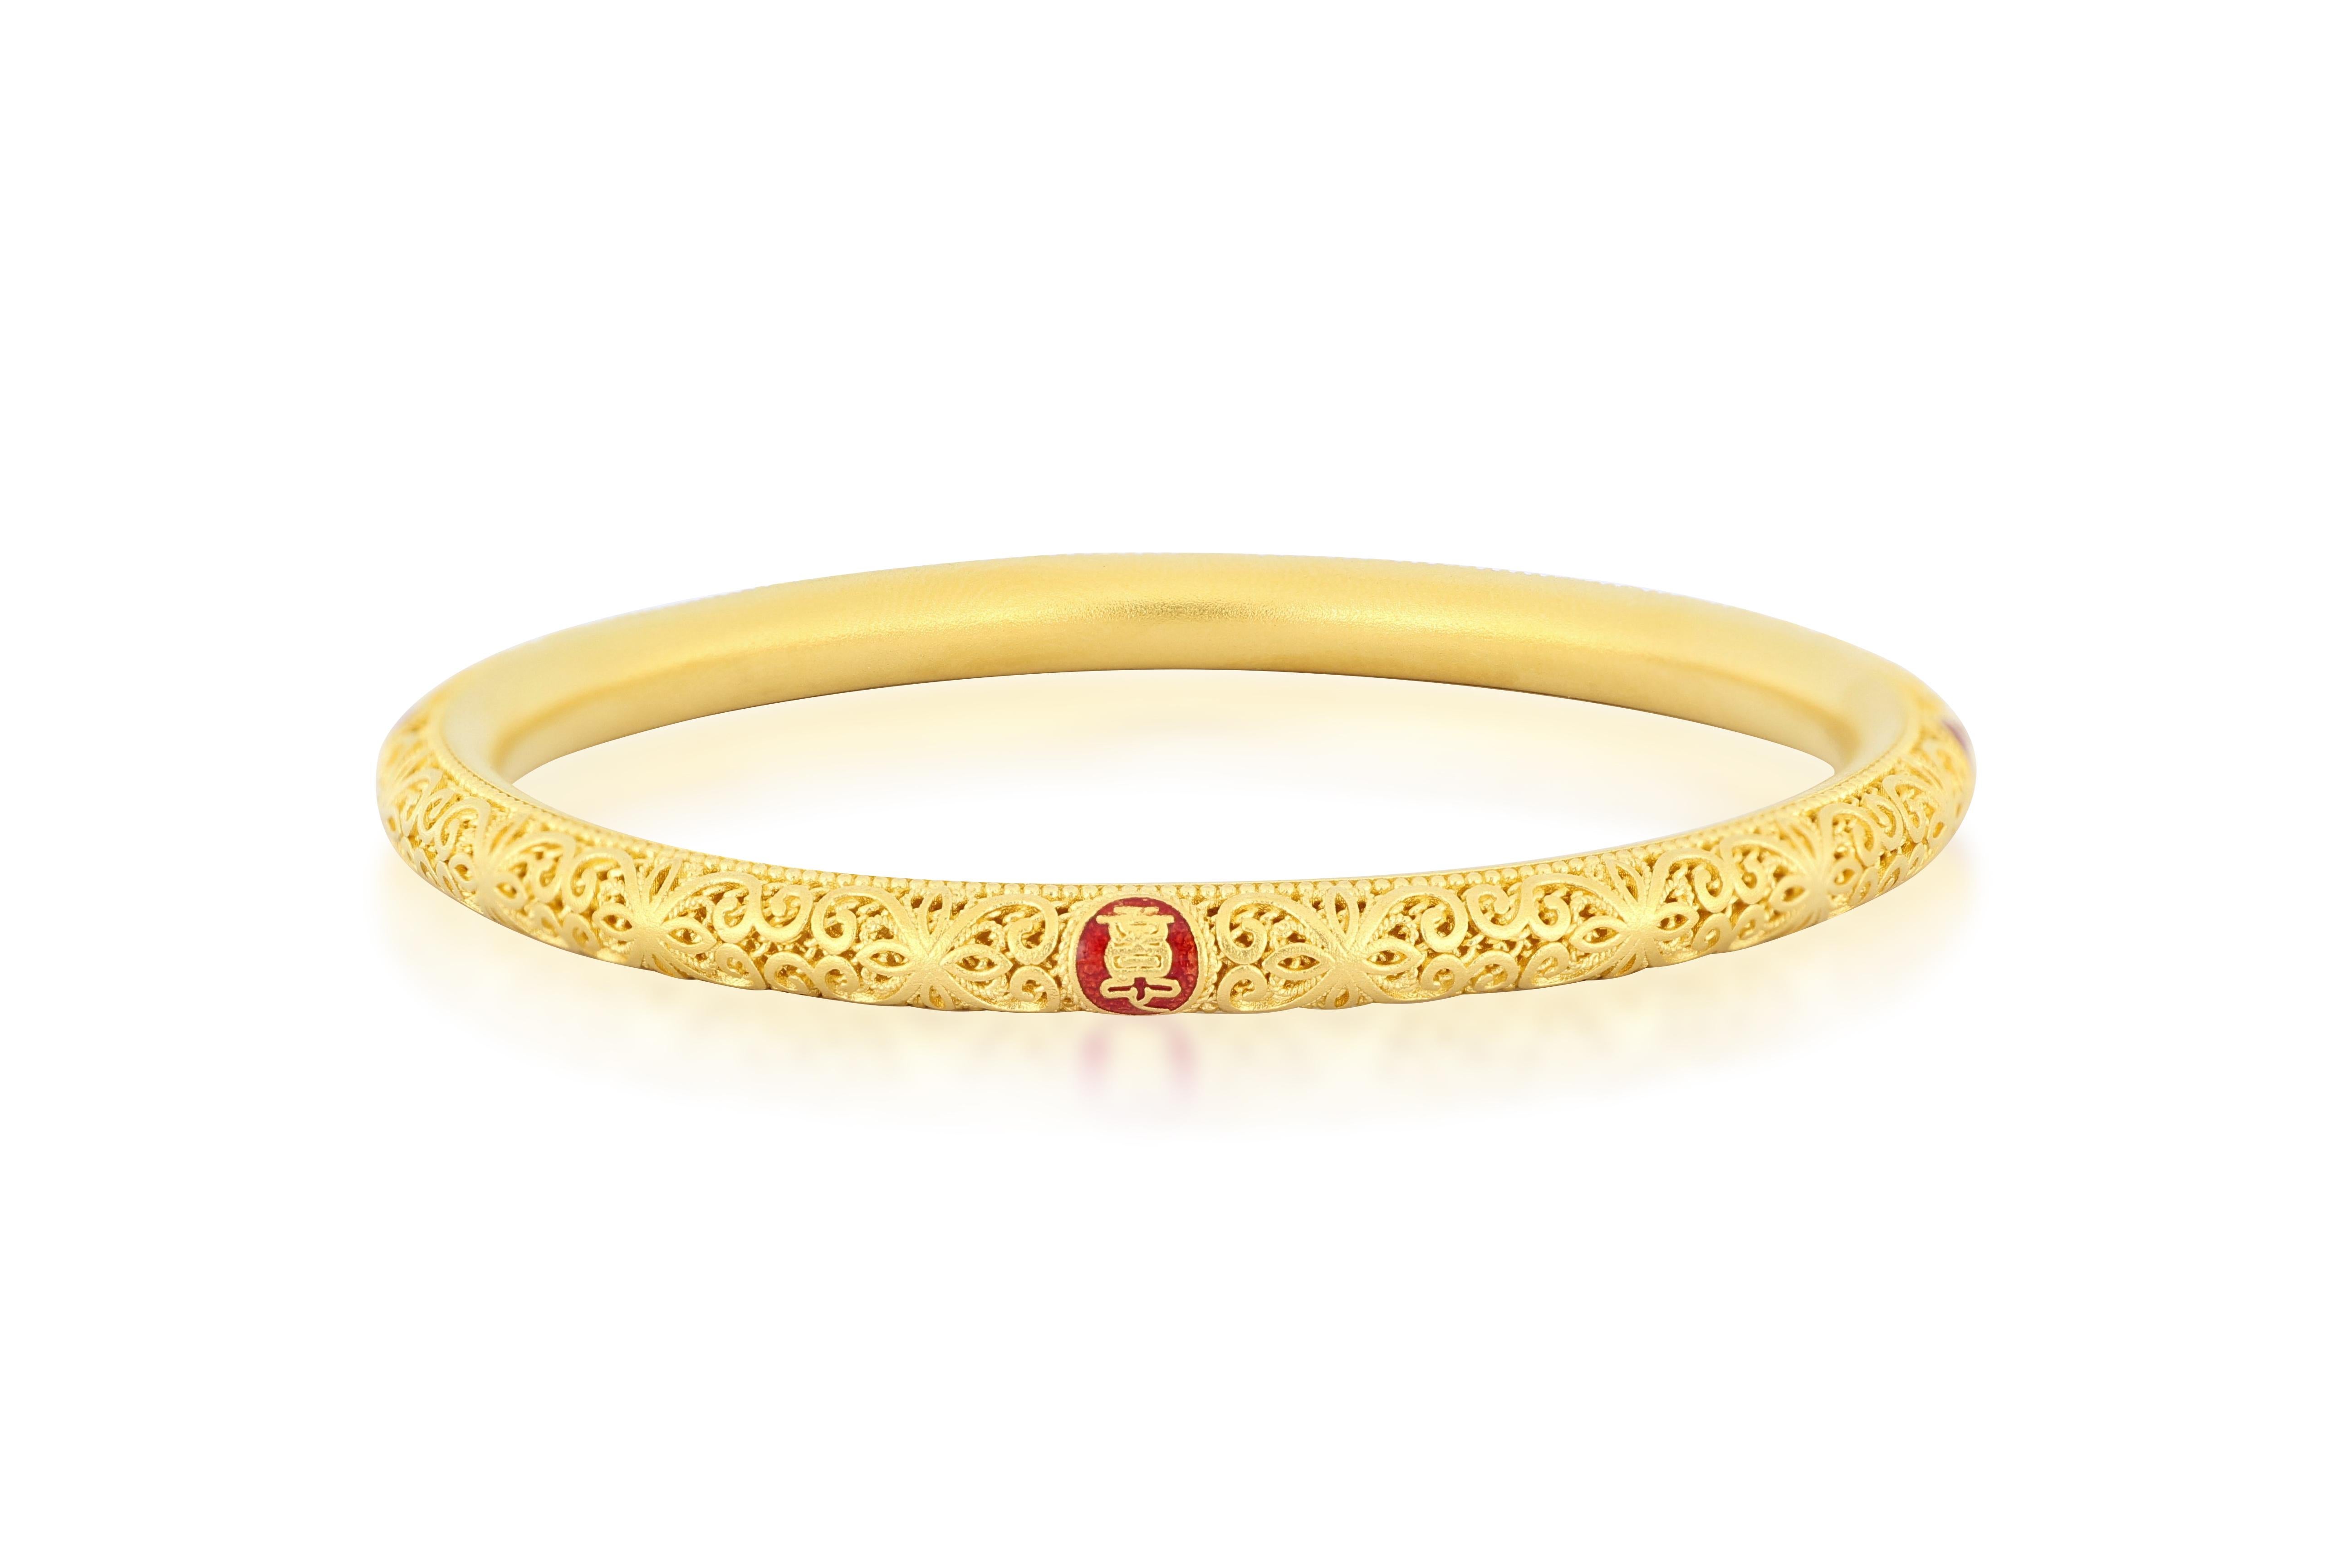 99.9% Pure gold bangle with Filigree Inlay Art In New Condition For Sale In Macau, MO